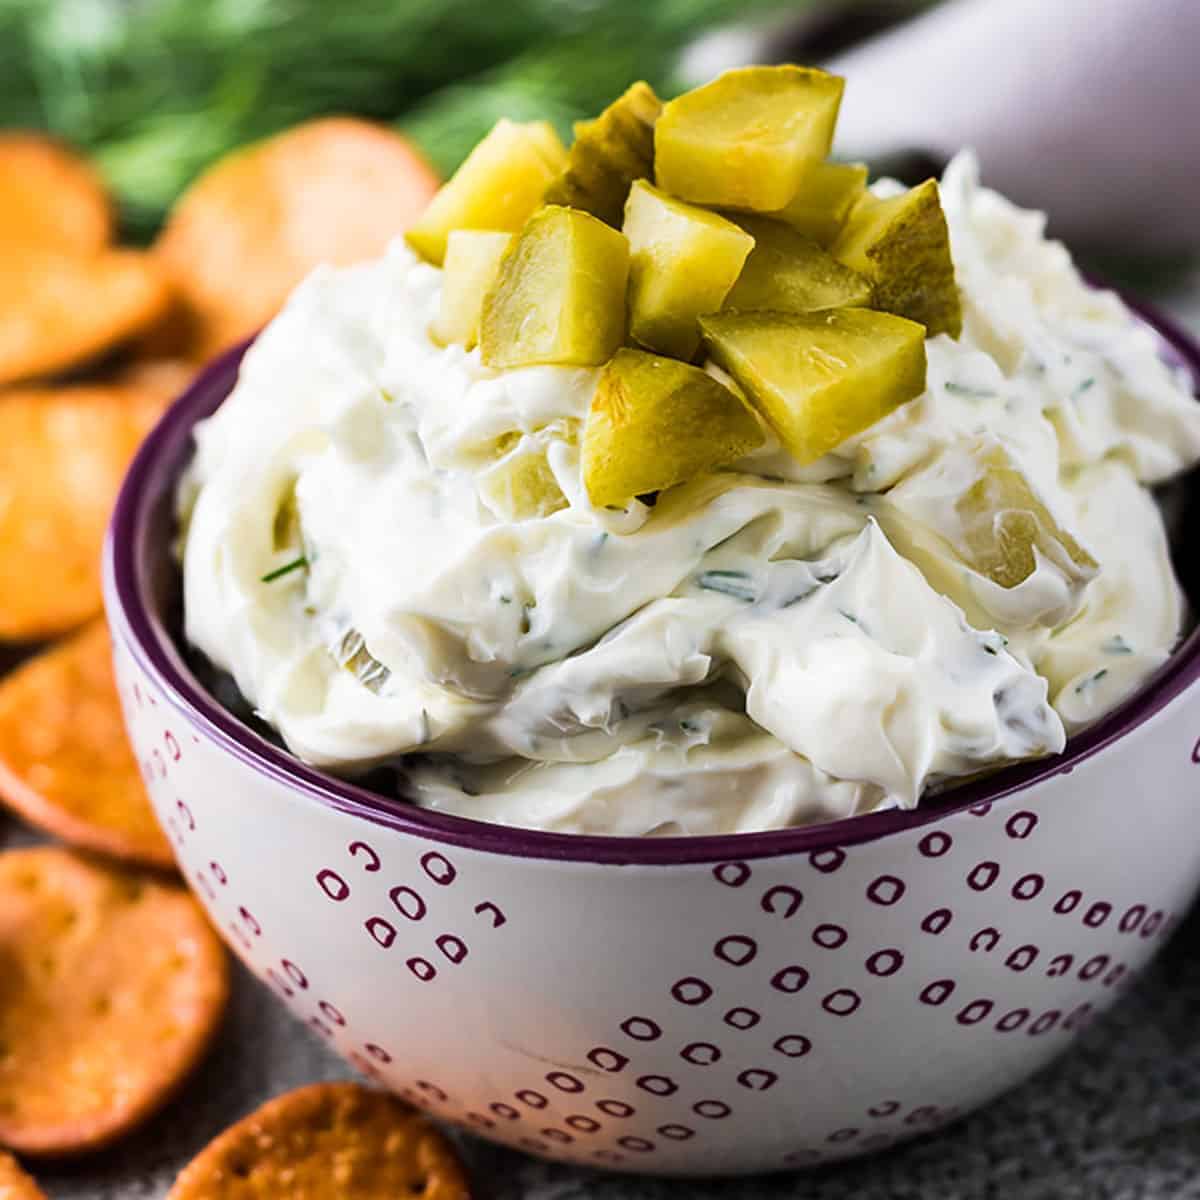 Dill pickle dip in a purple and white bowl.